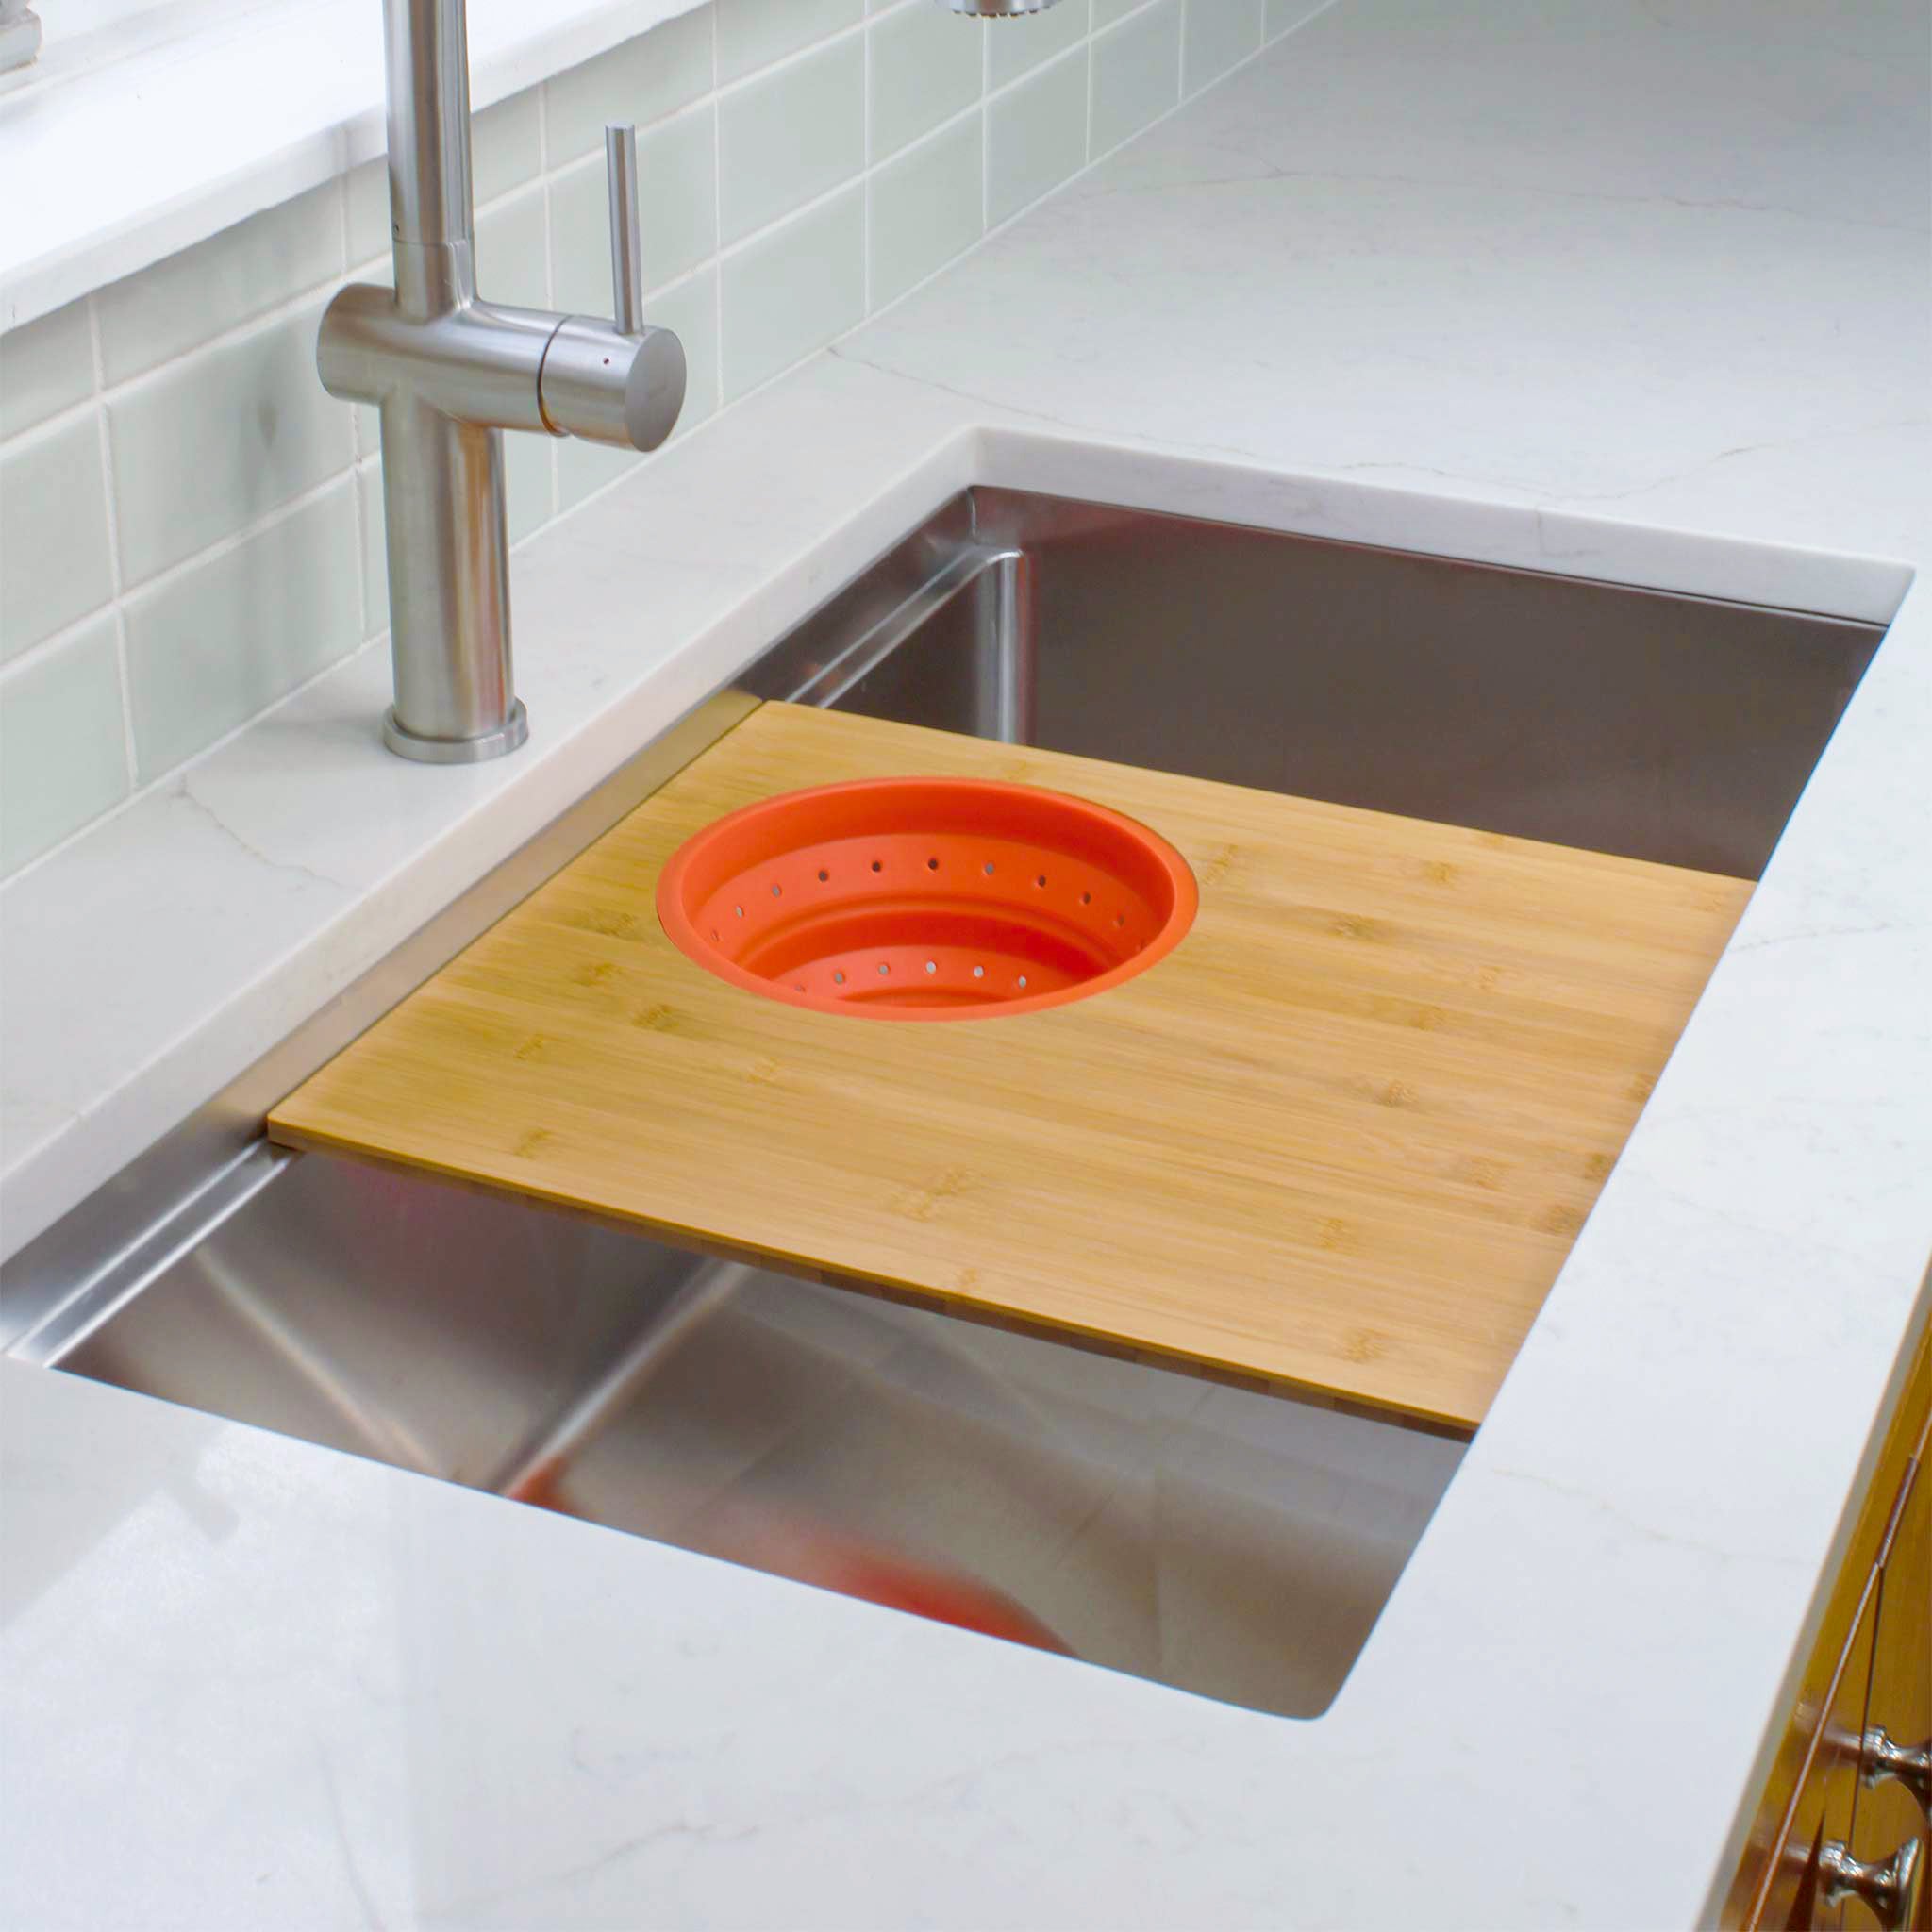 Seamless drain workstation sink with cutting board and silicone colander in Carrot Orange from Create Good Sinks